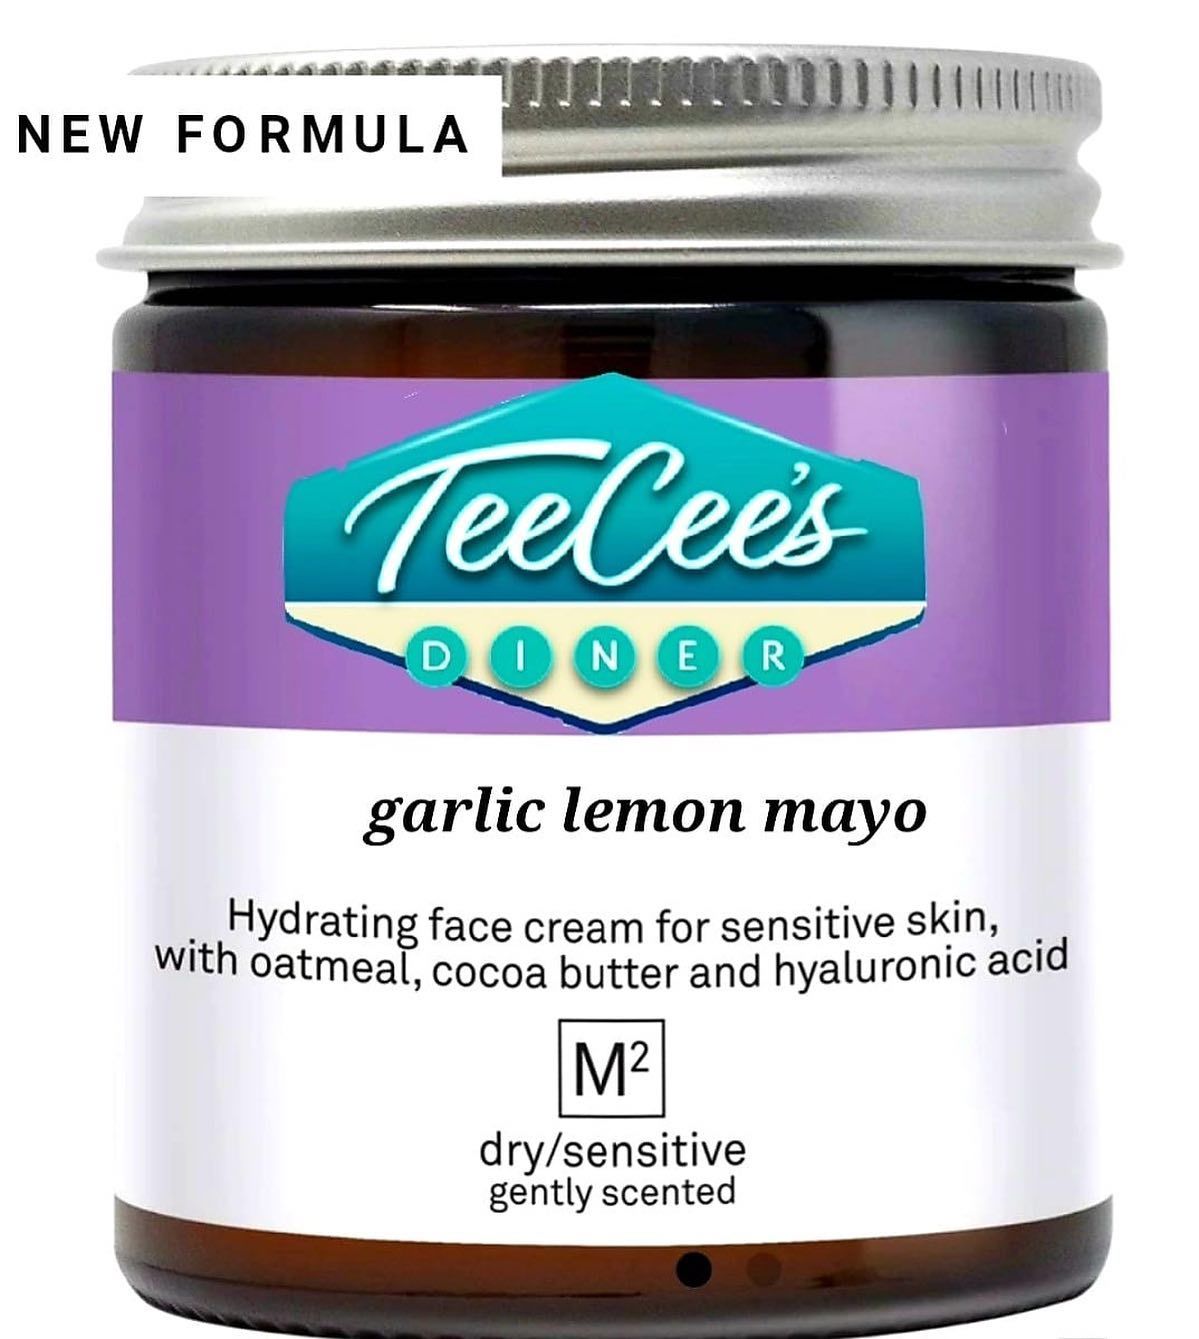 TeeCees Diner was supposedly launching its own face cream range, inspired by its dips